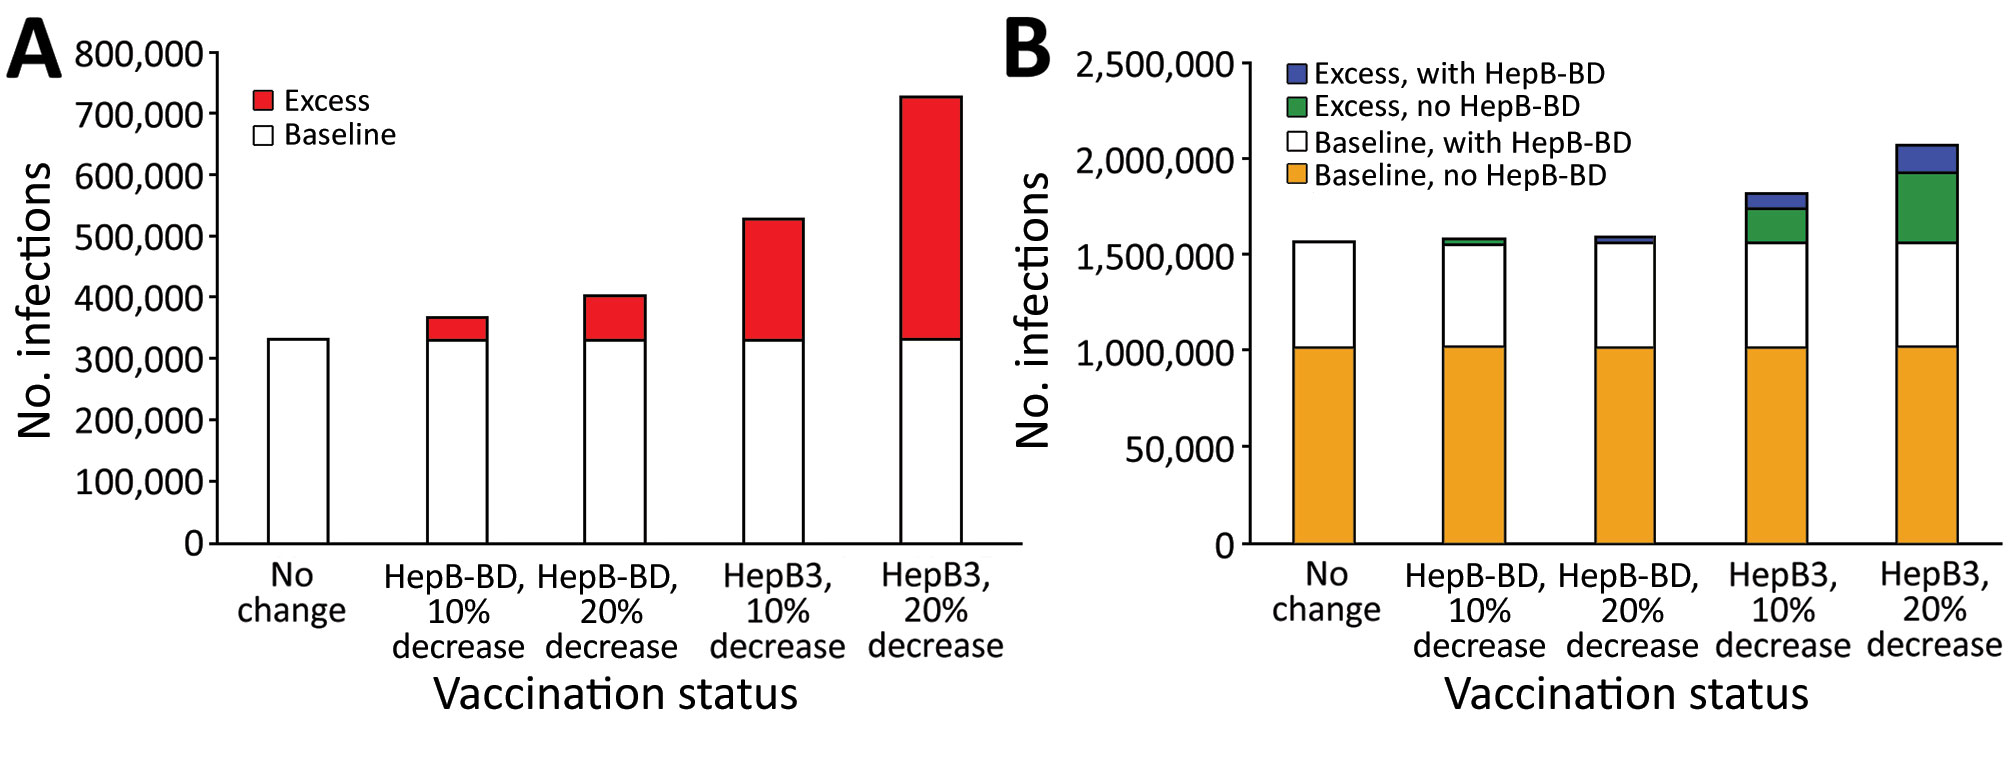 Numbers of additional chronic hepatitis B cases after decreased coverage for hepatitis B vaccine caused by COVID-19 in World Health Organization (WHO) Western Pacific Region (WPR) and African Region (AFR), 2020. We used a mathematical model to estimate the effect of decreased hepatitis B vaccination coverage on hepatitis B virus (HBV) infections among children born in 2020 compared with 2019. A) Total number of chronic HBV infections determined from 2019 data (baseline) and estimates of excess chronic HBV infections from the model after 10% or 20% decrease in HepB-BD or HepB3 vaccination coverage in the World Health Organization WHO Western Pacific Region. All countries and areas in the WPR have introduced HepB-BD, including 2 countries that provide HepB-BD only to infants born to hepatitis B surface antigen–positive mothers. B) Total number of chronic HBV infections (baseline) and estimates of excess chronic HBV infections after 10% or 20% decrease in HepB-BD or HepB3 vaccination coverage in the WHO AFR. Comparisons were made between countries with and without HepB-BD. Fourteen countries in the AFR have introduced HepB-BD, including 1 country that provides HepB BD-only to infants born to hepatitis B surface antigen–positive mothers. HepB-BD coverage data were only available for countries that provided universal birth doses. HepB-BD, birth dose; HepB3, third-dose hepatitis B.